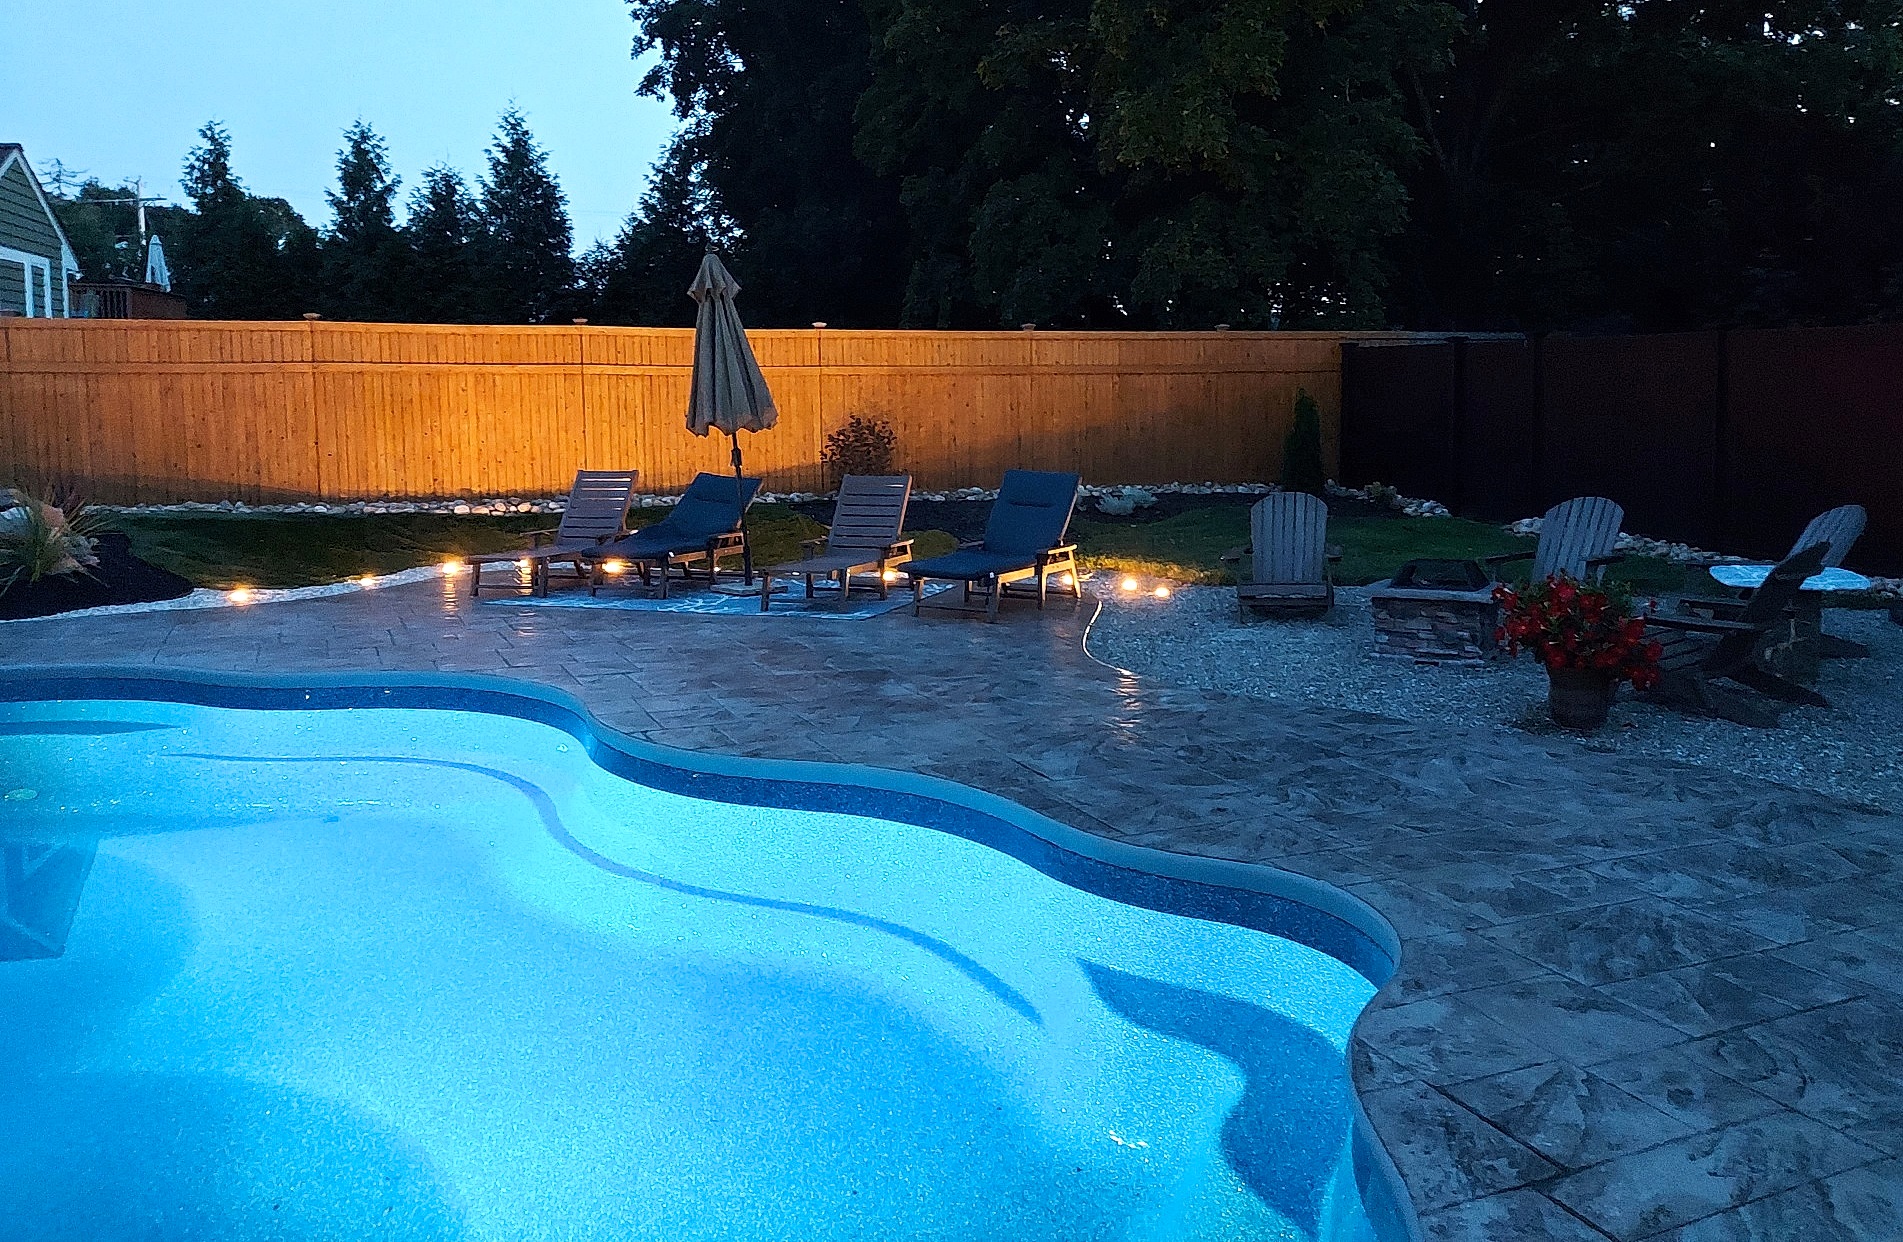 You are currently viewing Top Hyde Park Home Under 500K with Glowing Lagoon Pool